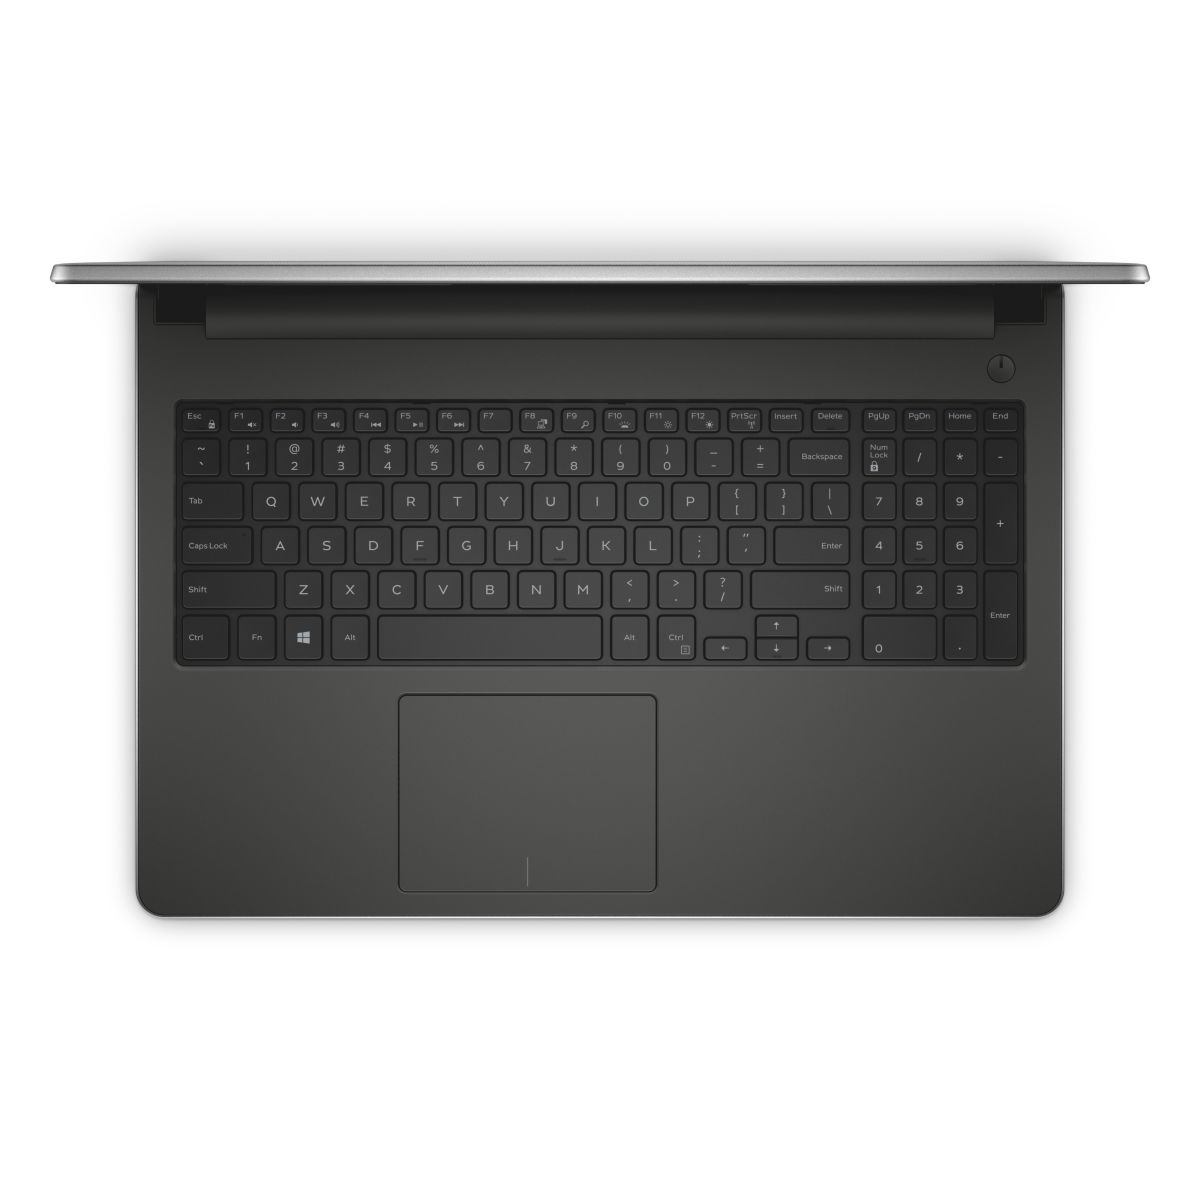 DELL Inspiron 5558 - 5558-INS-0789-SLR laptop specifications